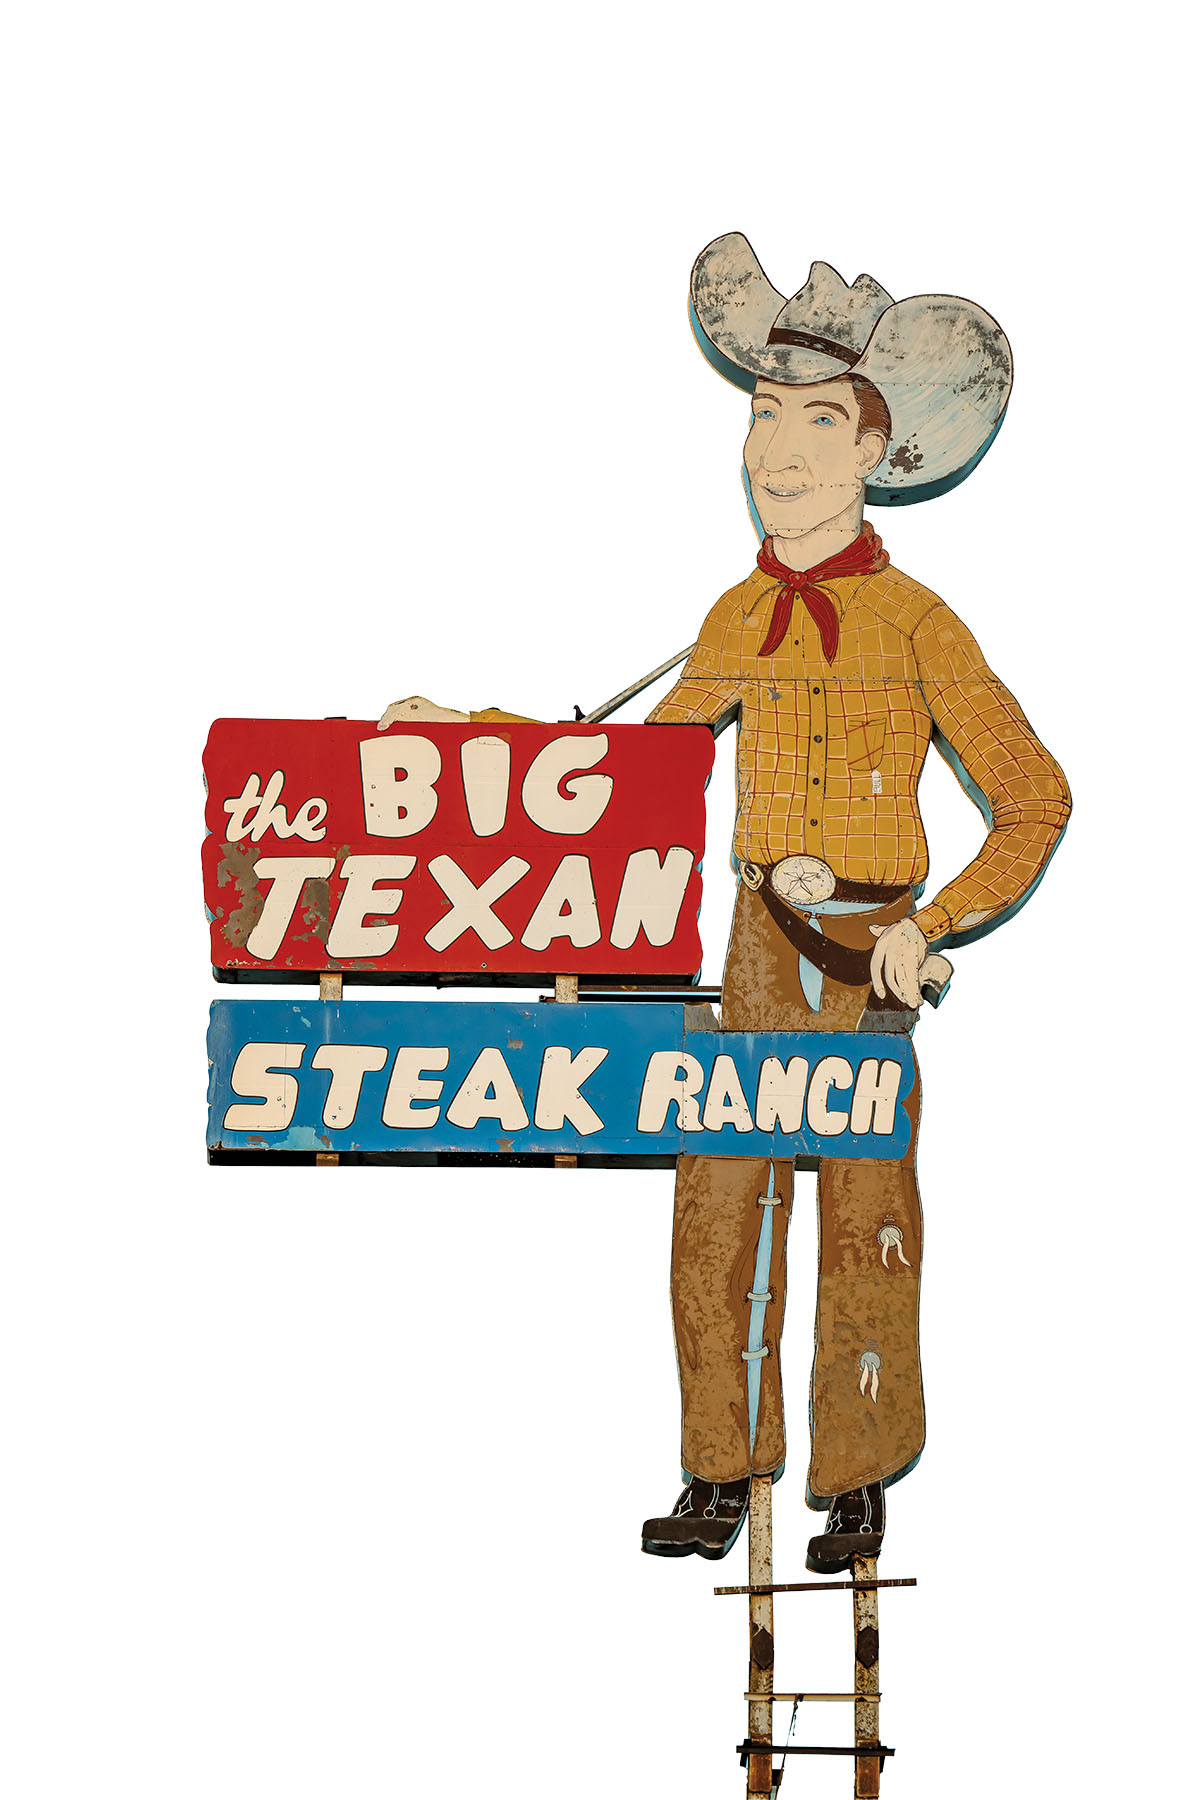 A cutout of a sign reading "the Big Texan Steak Ranch" and a large cowboy